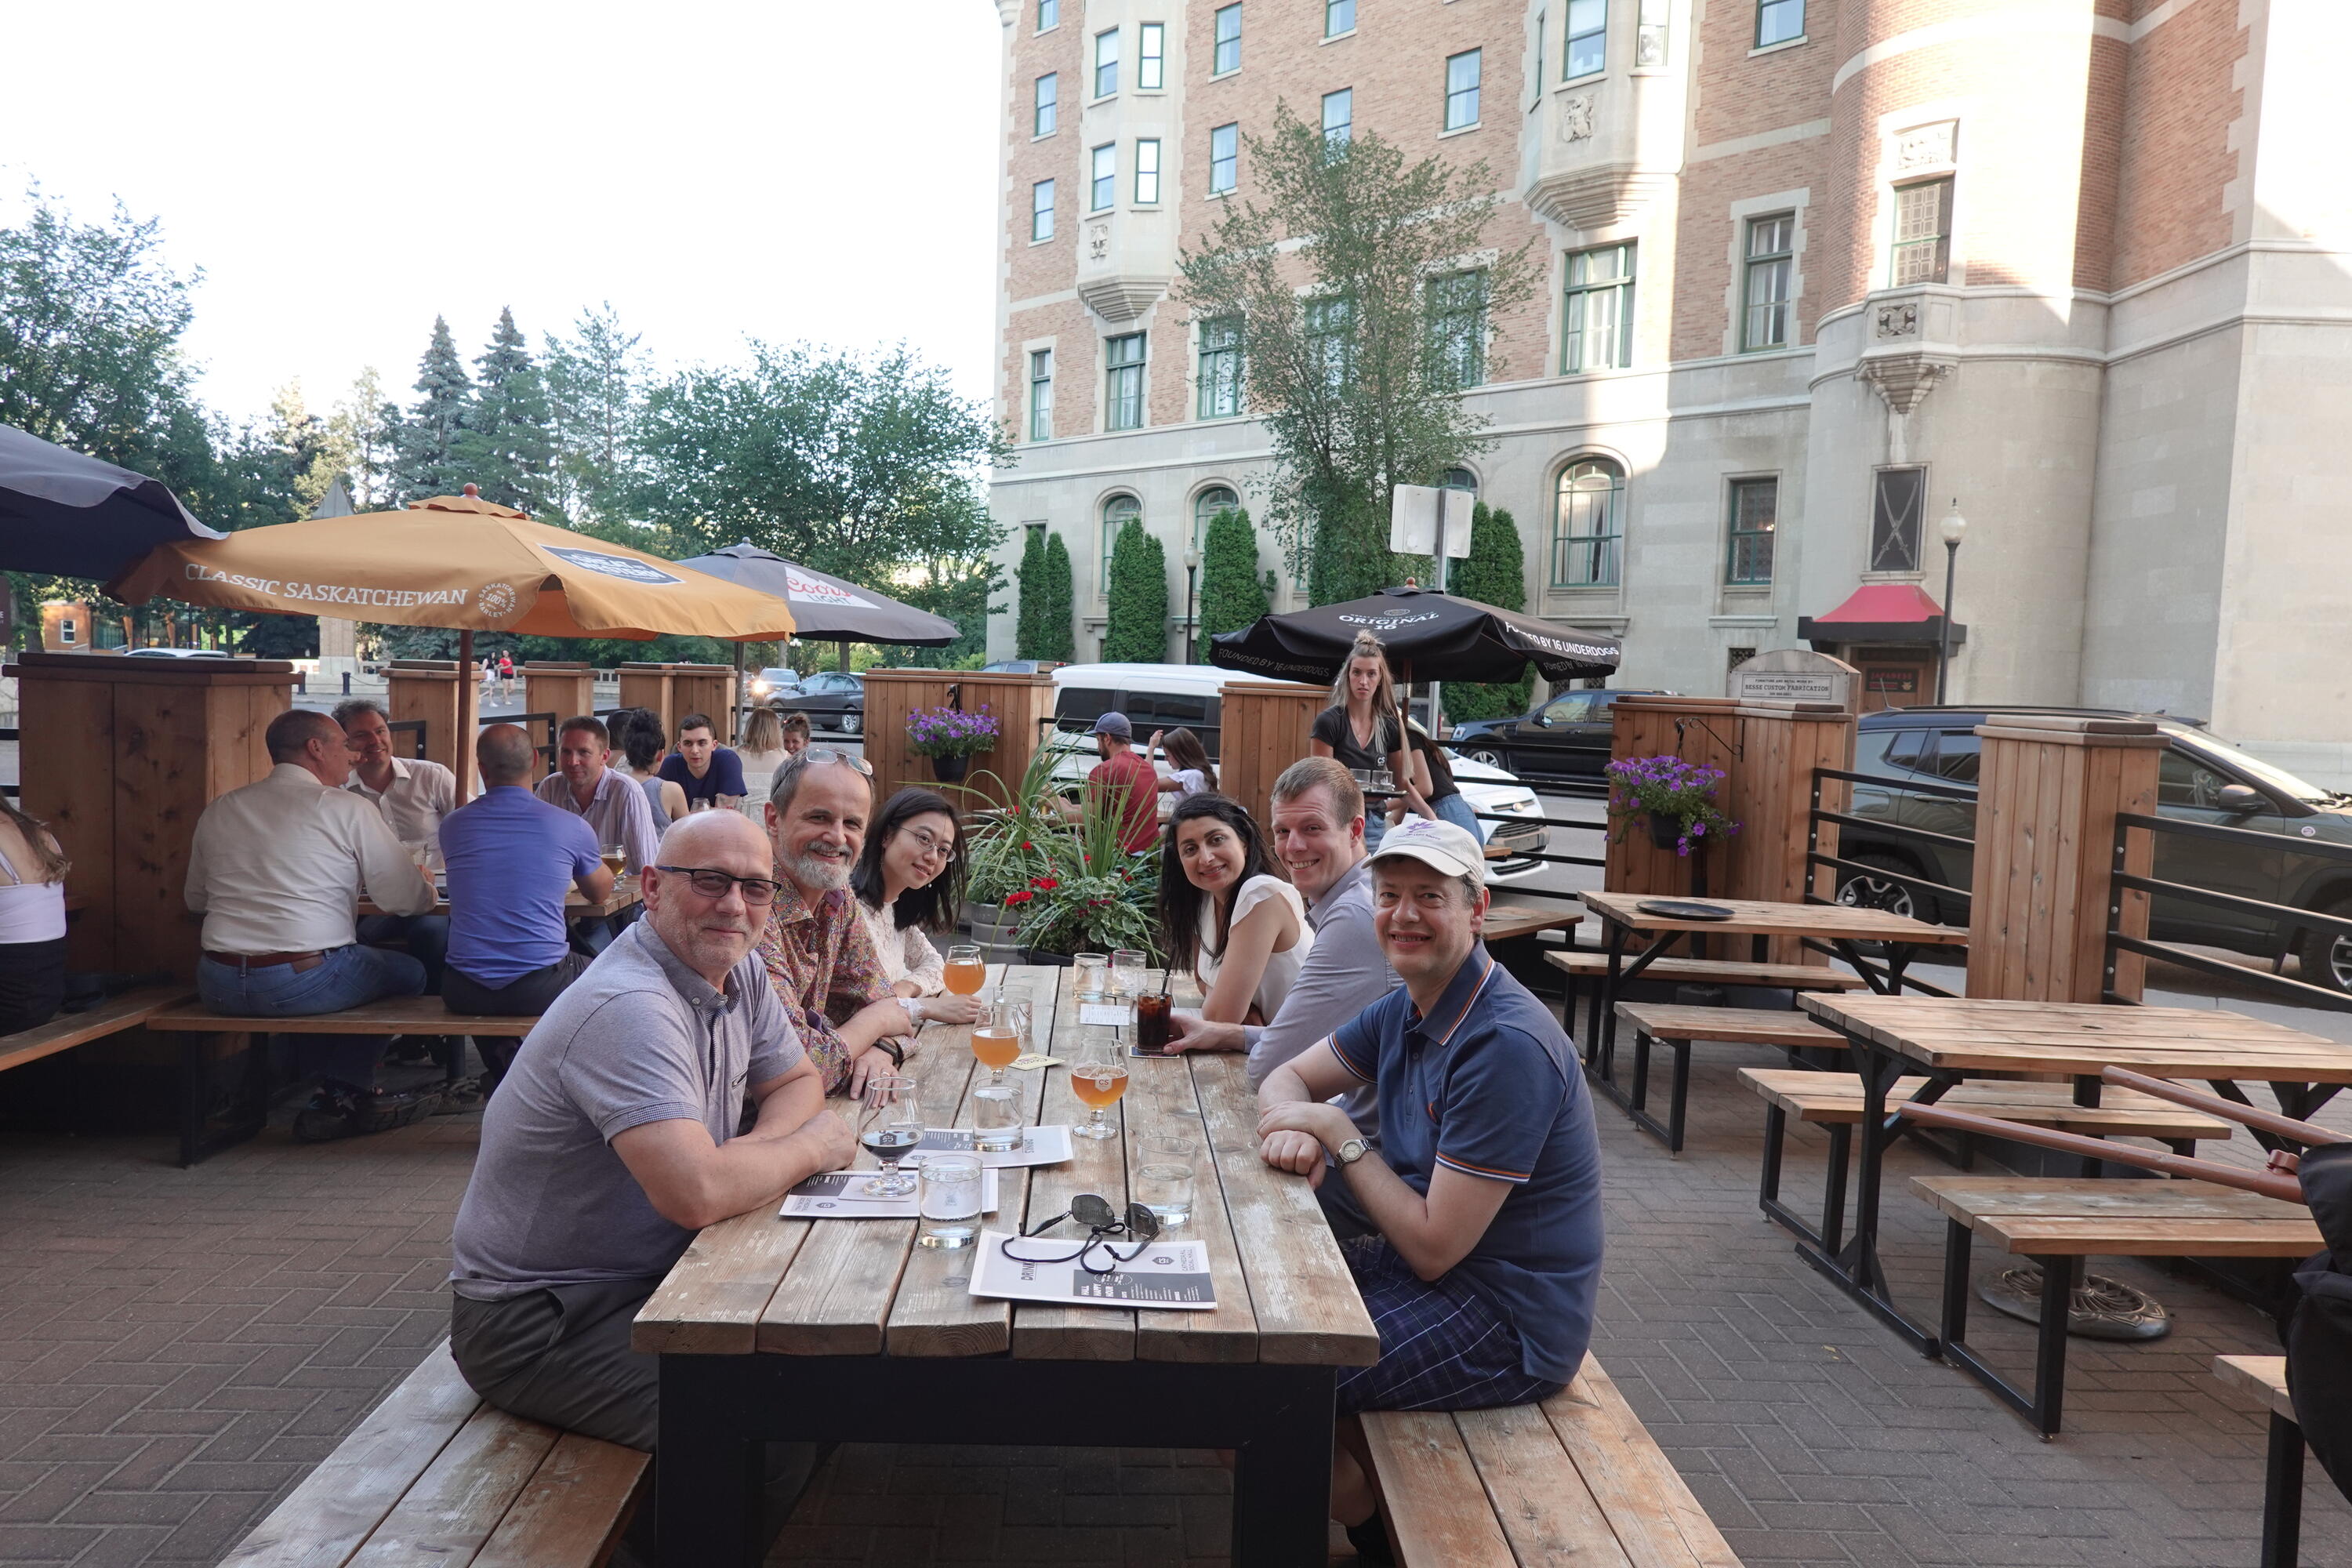 A group of people sitting around a table on the restaurant patio